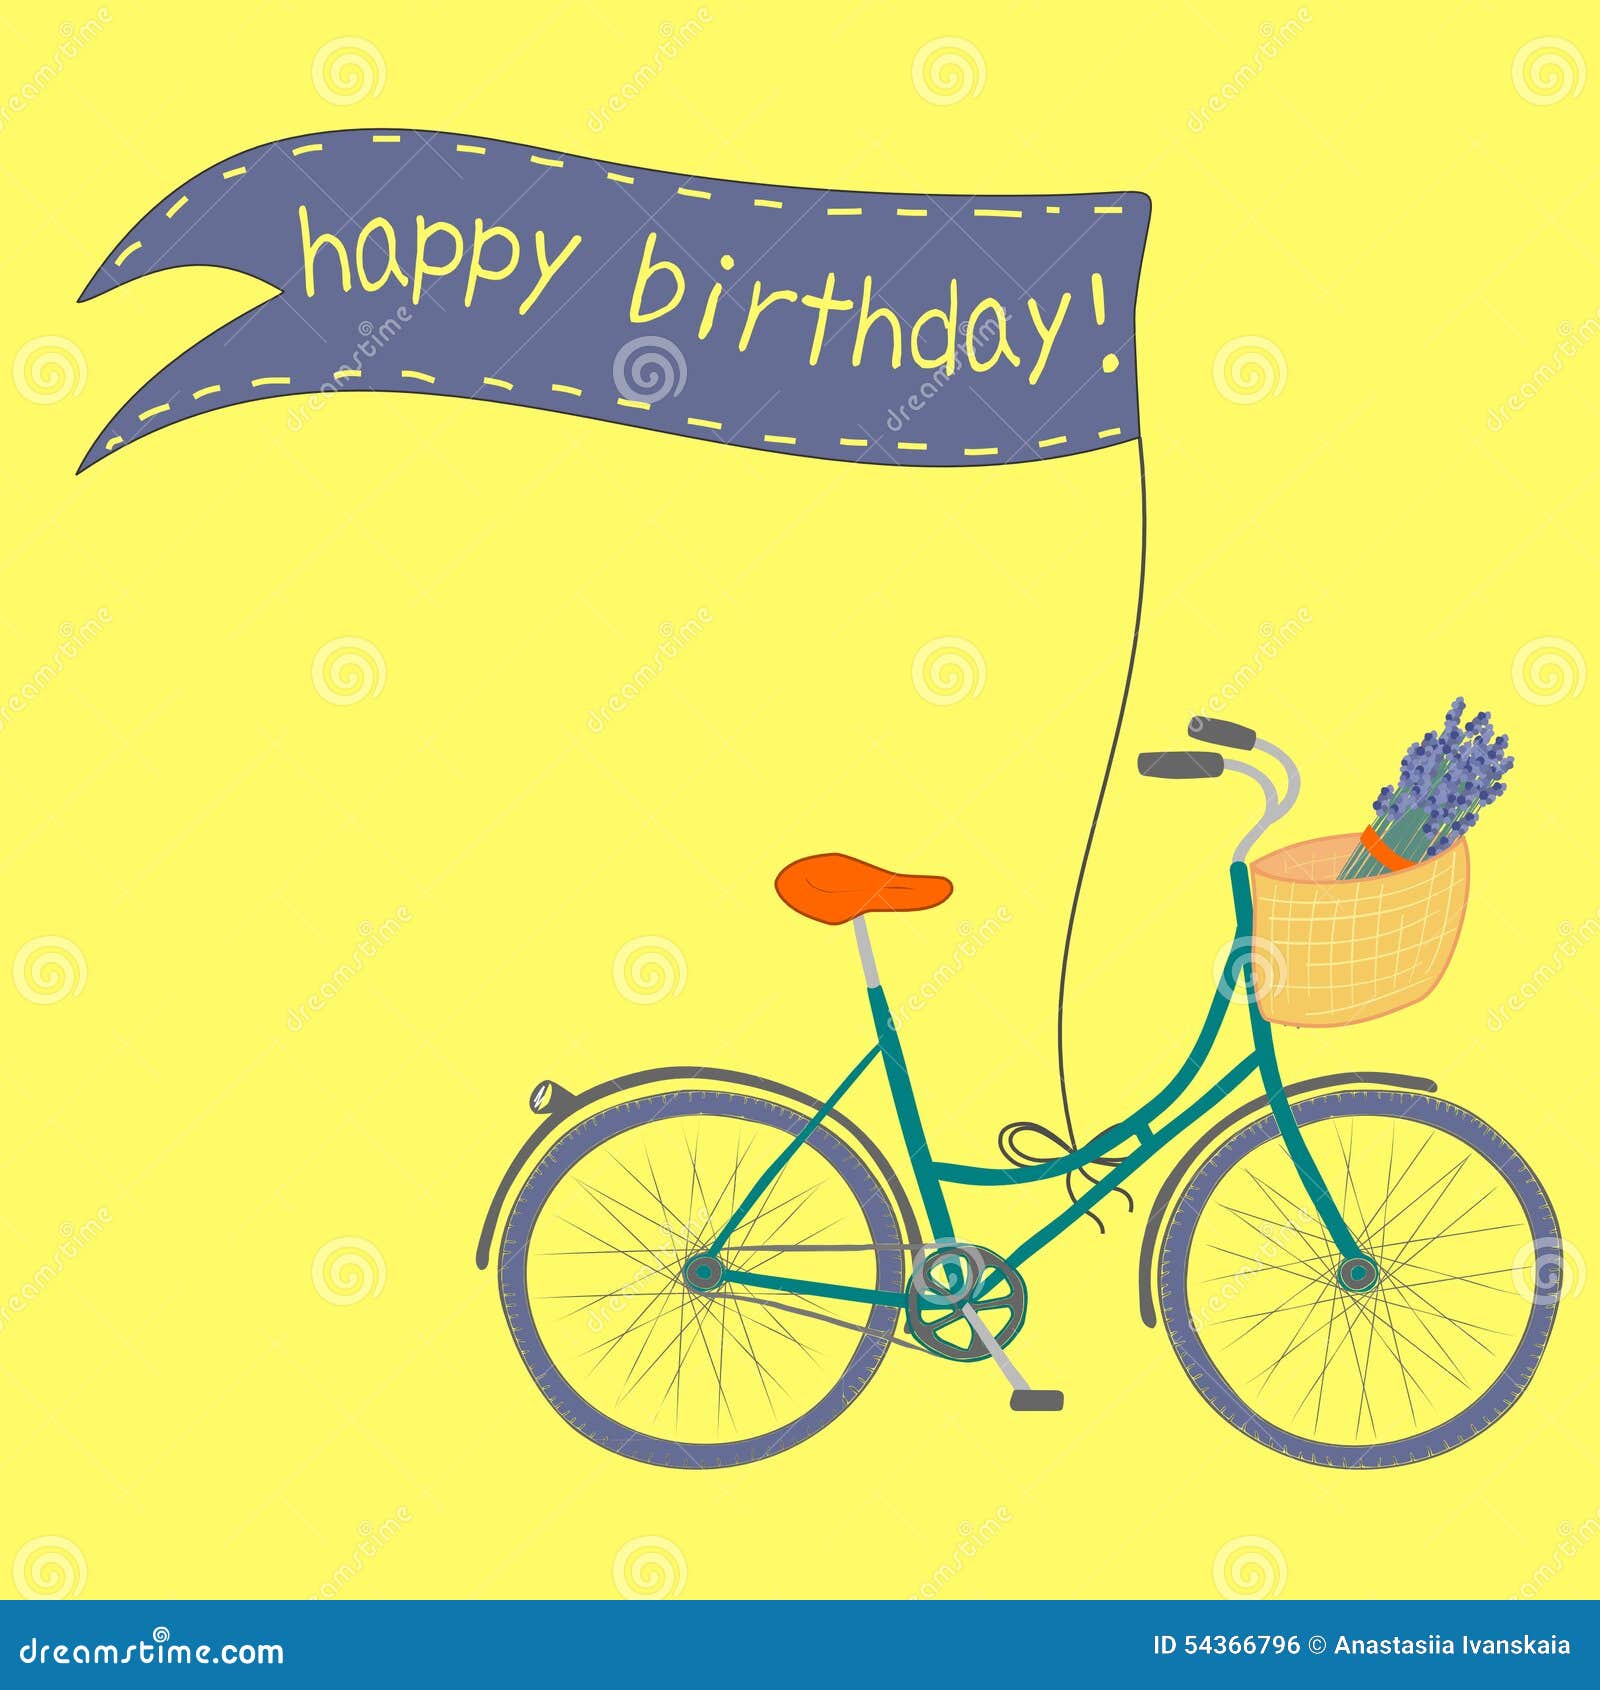 Poster with Cute Hand Drawn City Bike Stock Vector - Illustration of ...